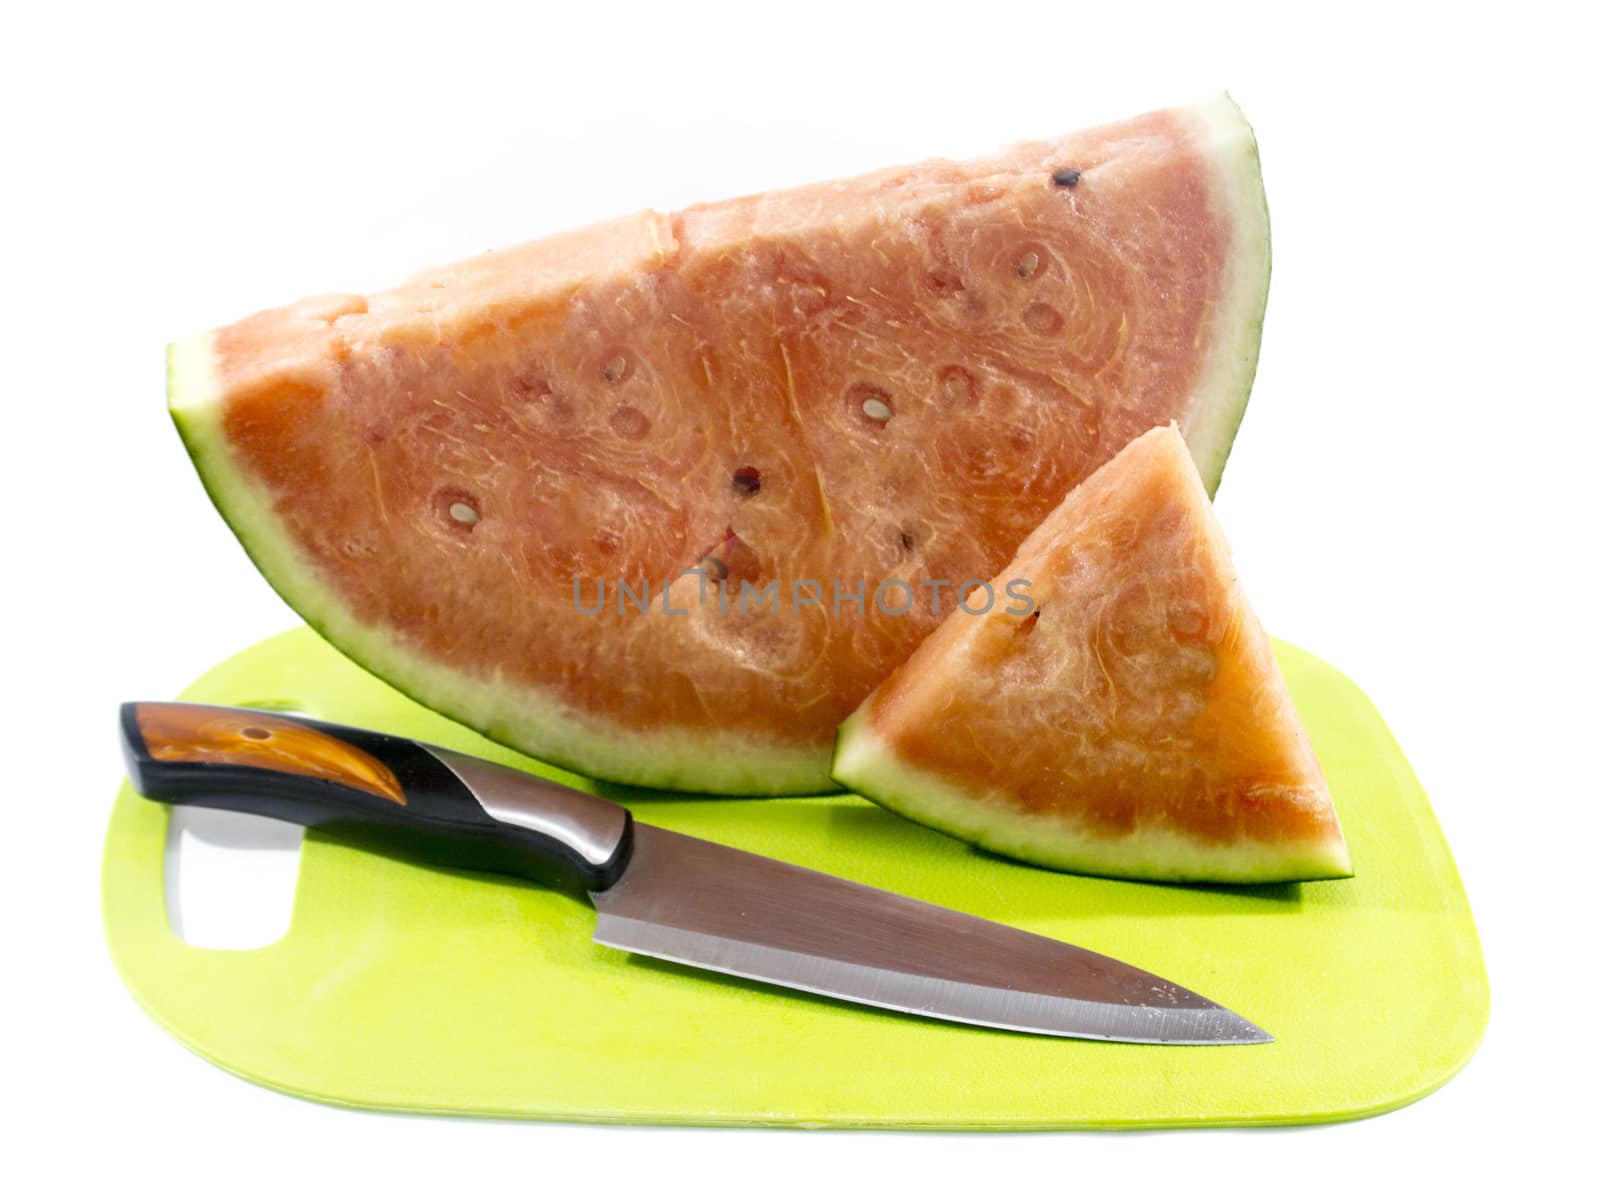 Slices of watermelon on green plastic board with knife.